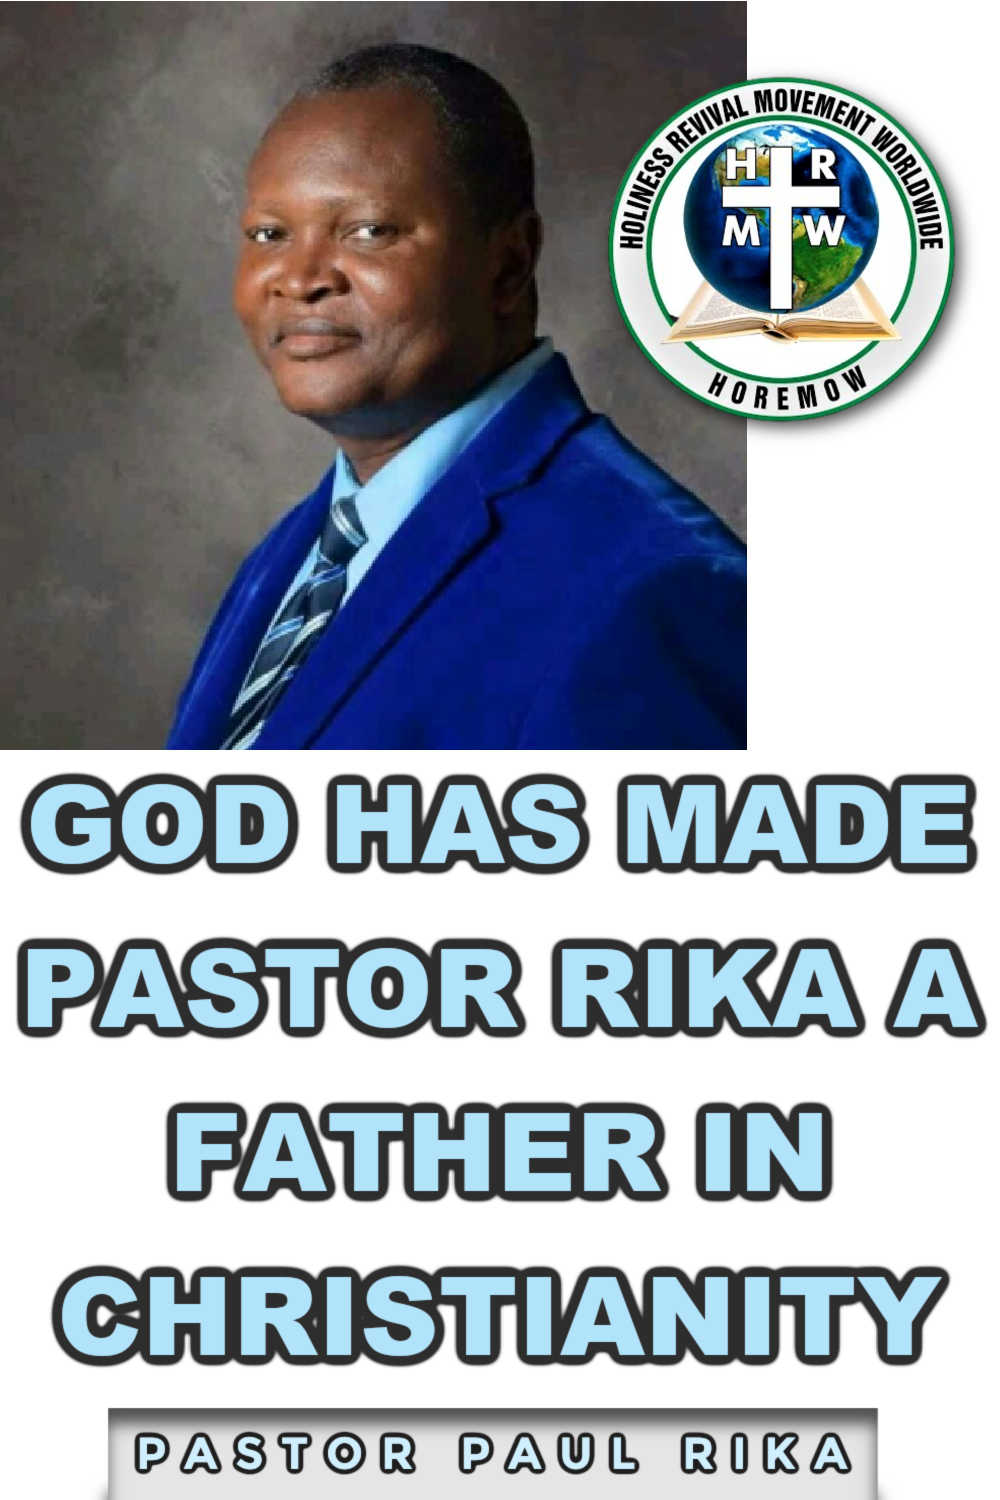 God has made Pastor Rika Like a father in Christianity